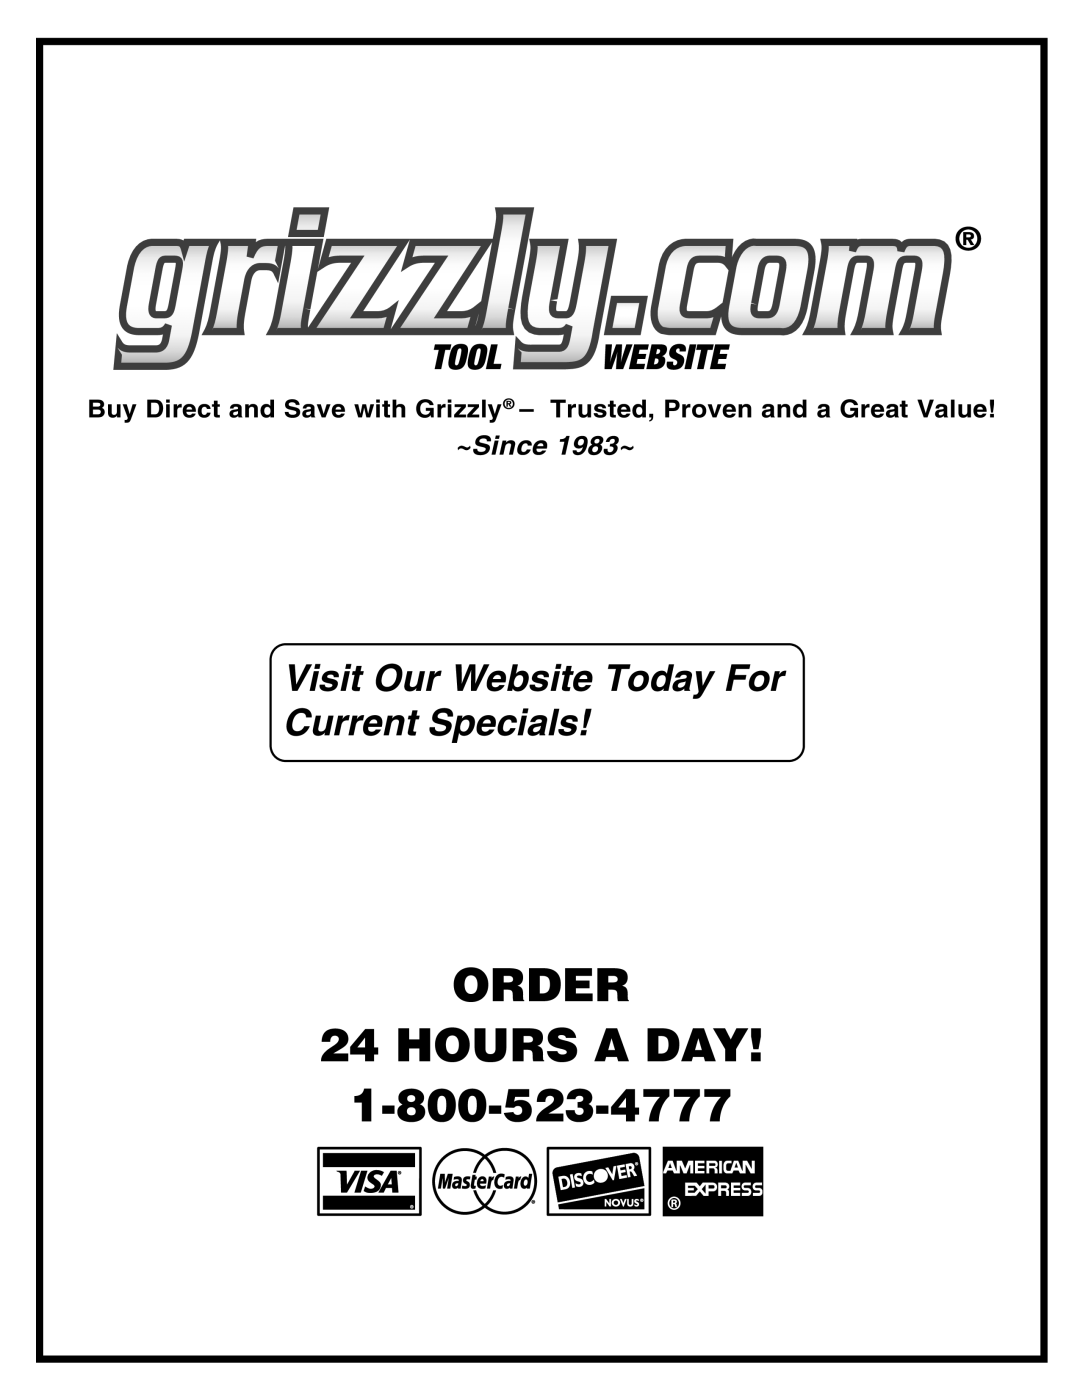 Grizzly G0700 Buy Direct and Save with Grizzly - Trusted, Proven and a Great Value, ORDER 24 HOURS A DAY, ~Since 1983~ 